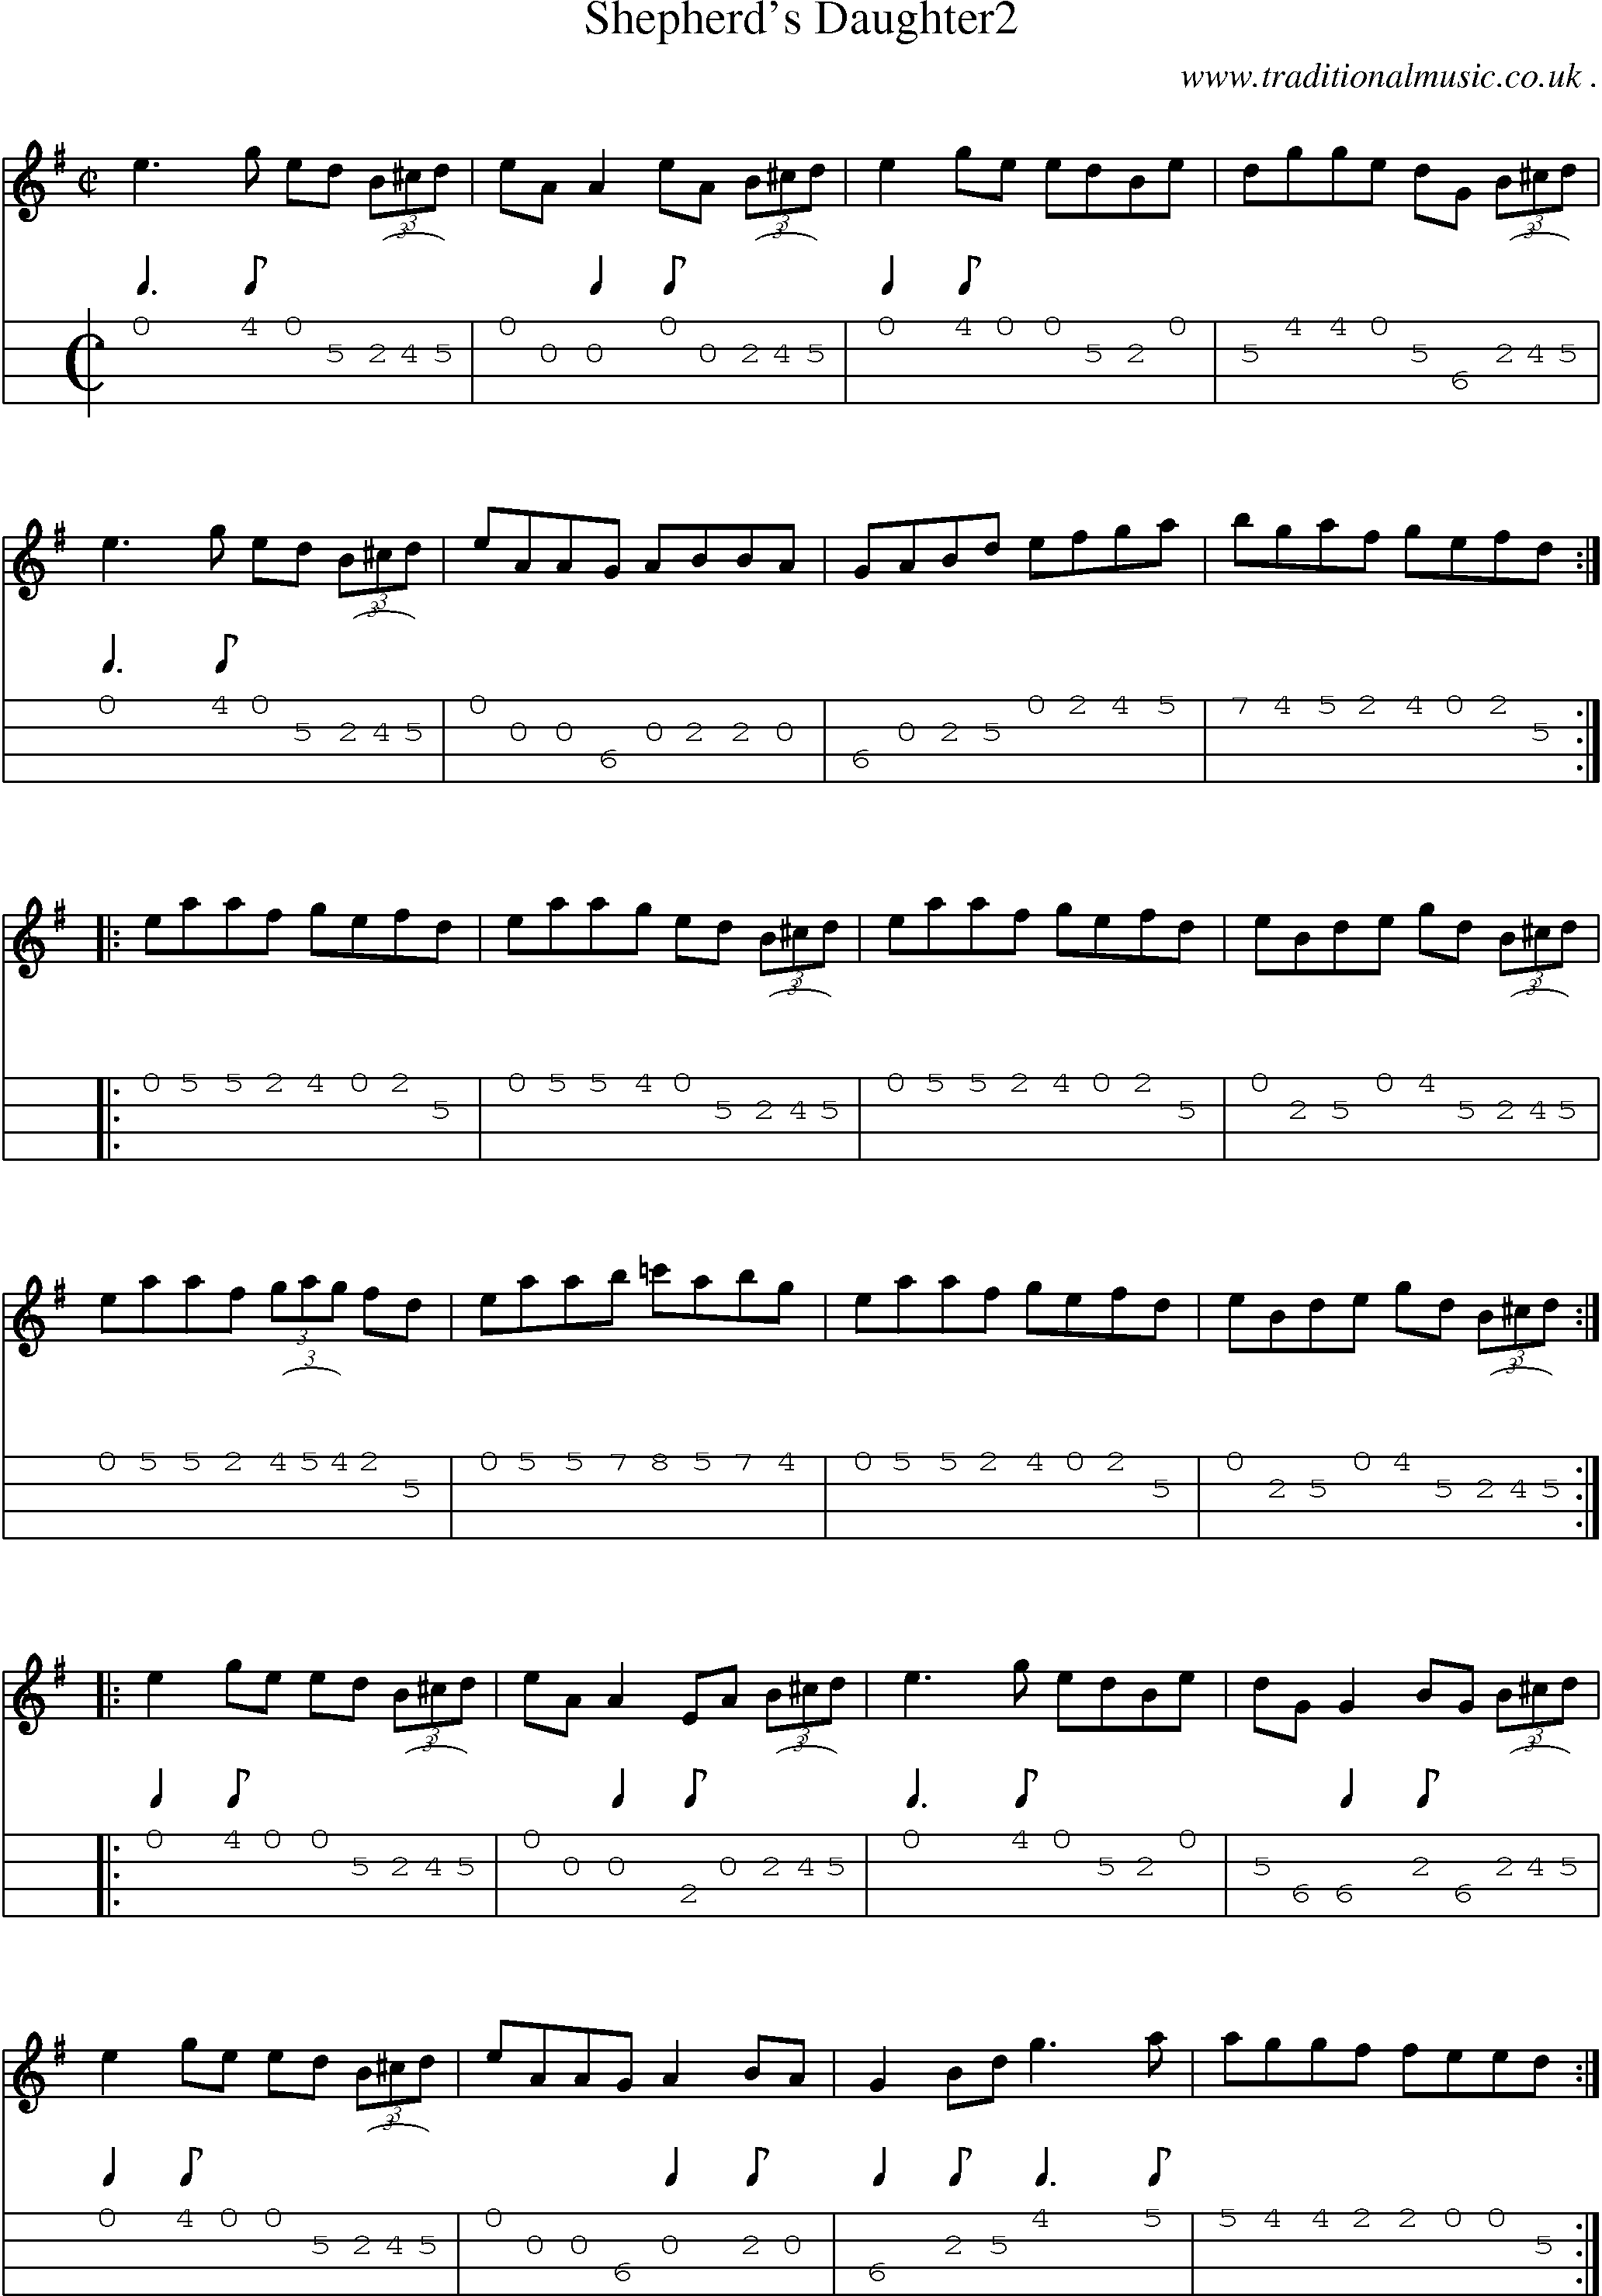 Sheet-Music and Mandolin Tabs for Shepherds Daughter2